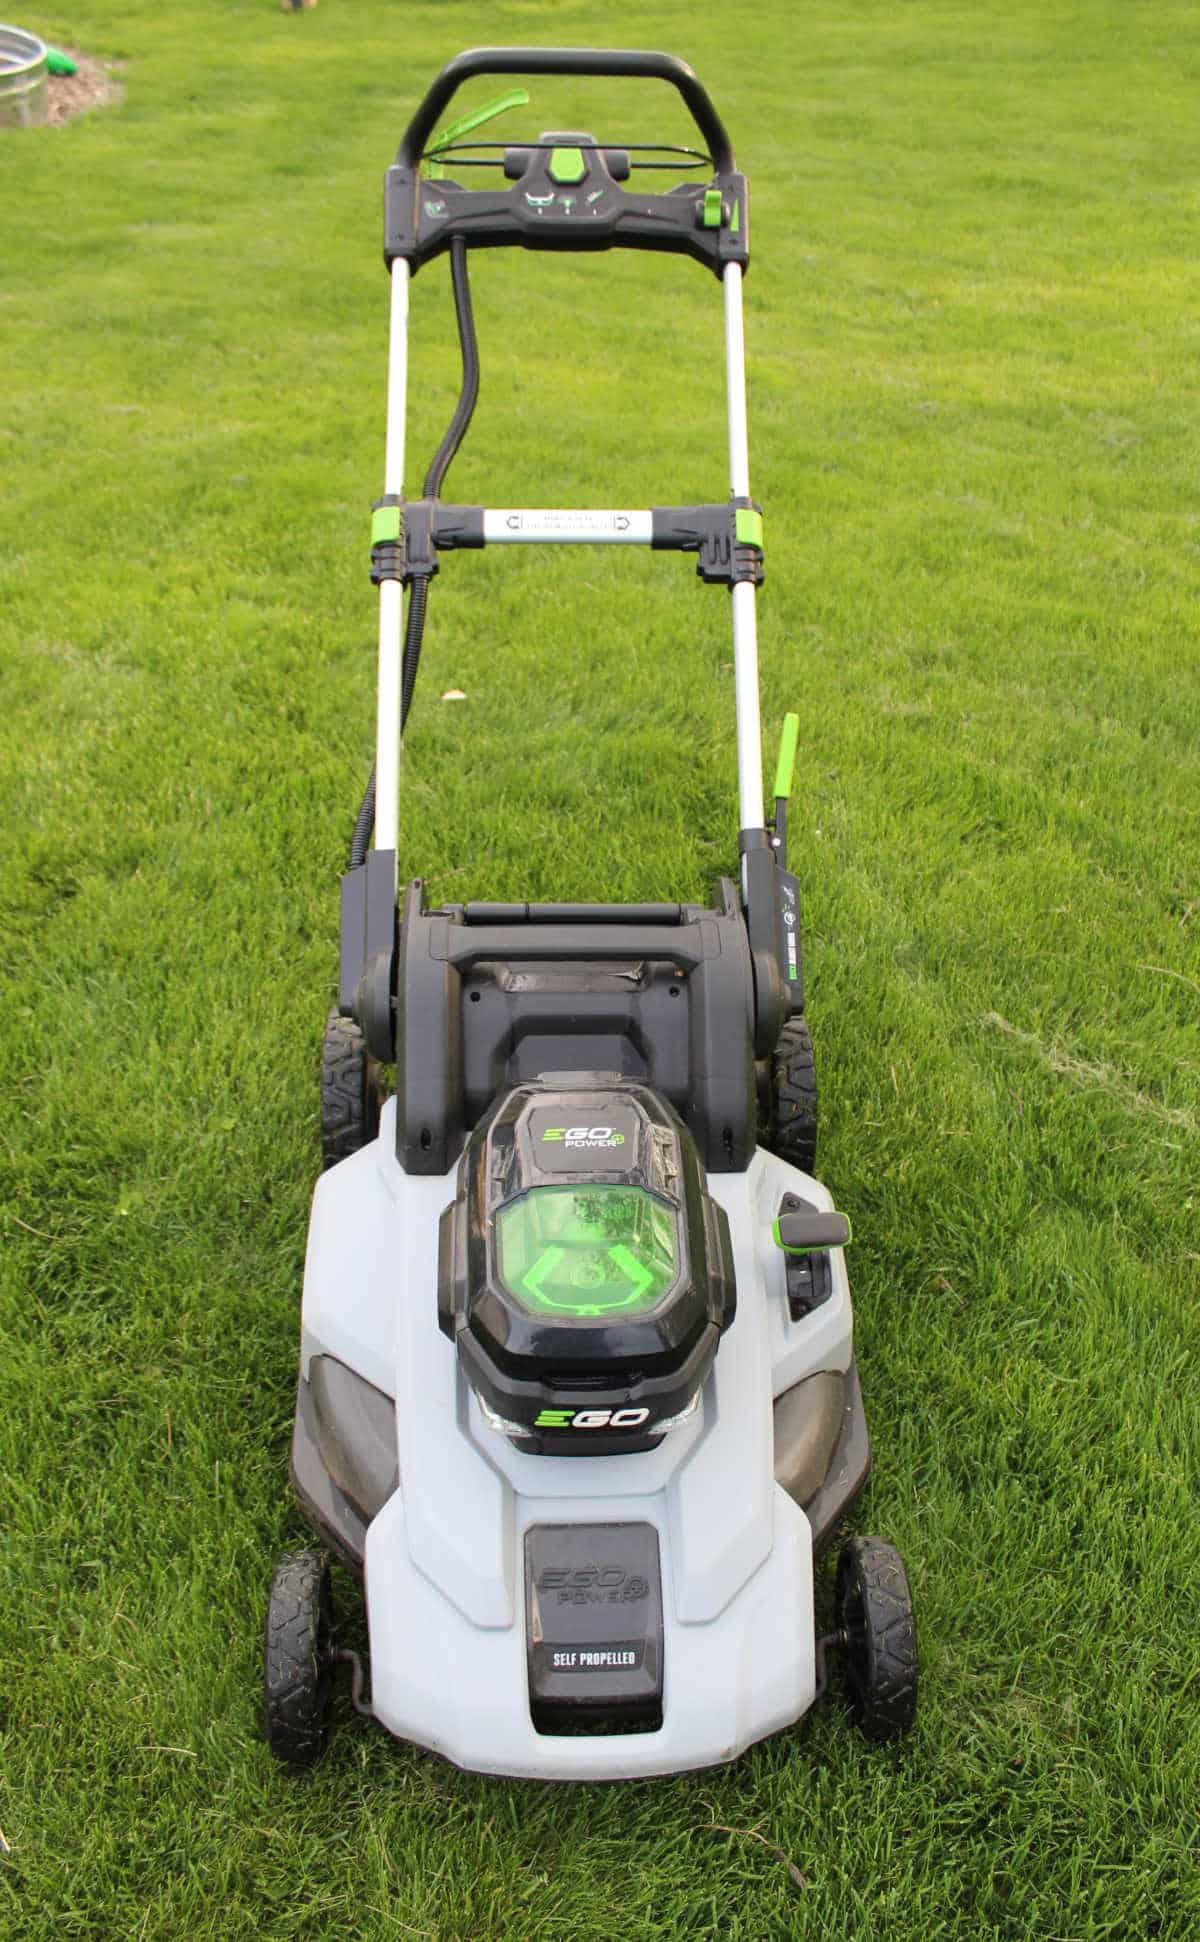 an EGO battery operated lawnmower on the grass.